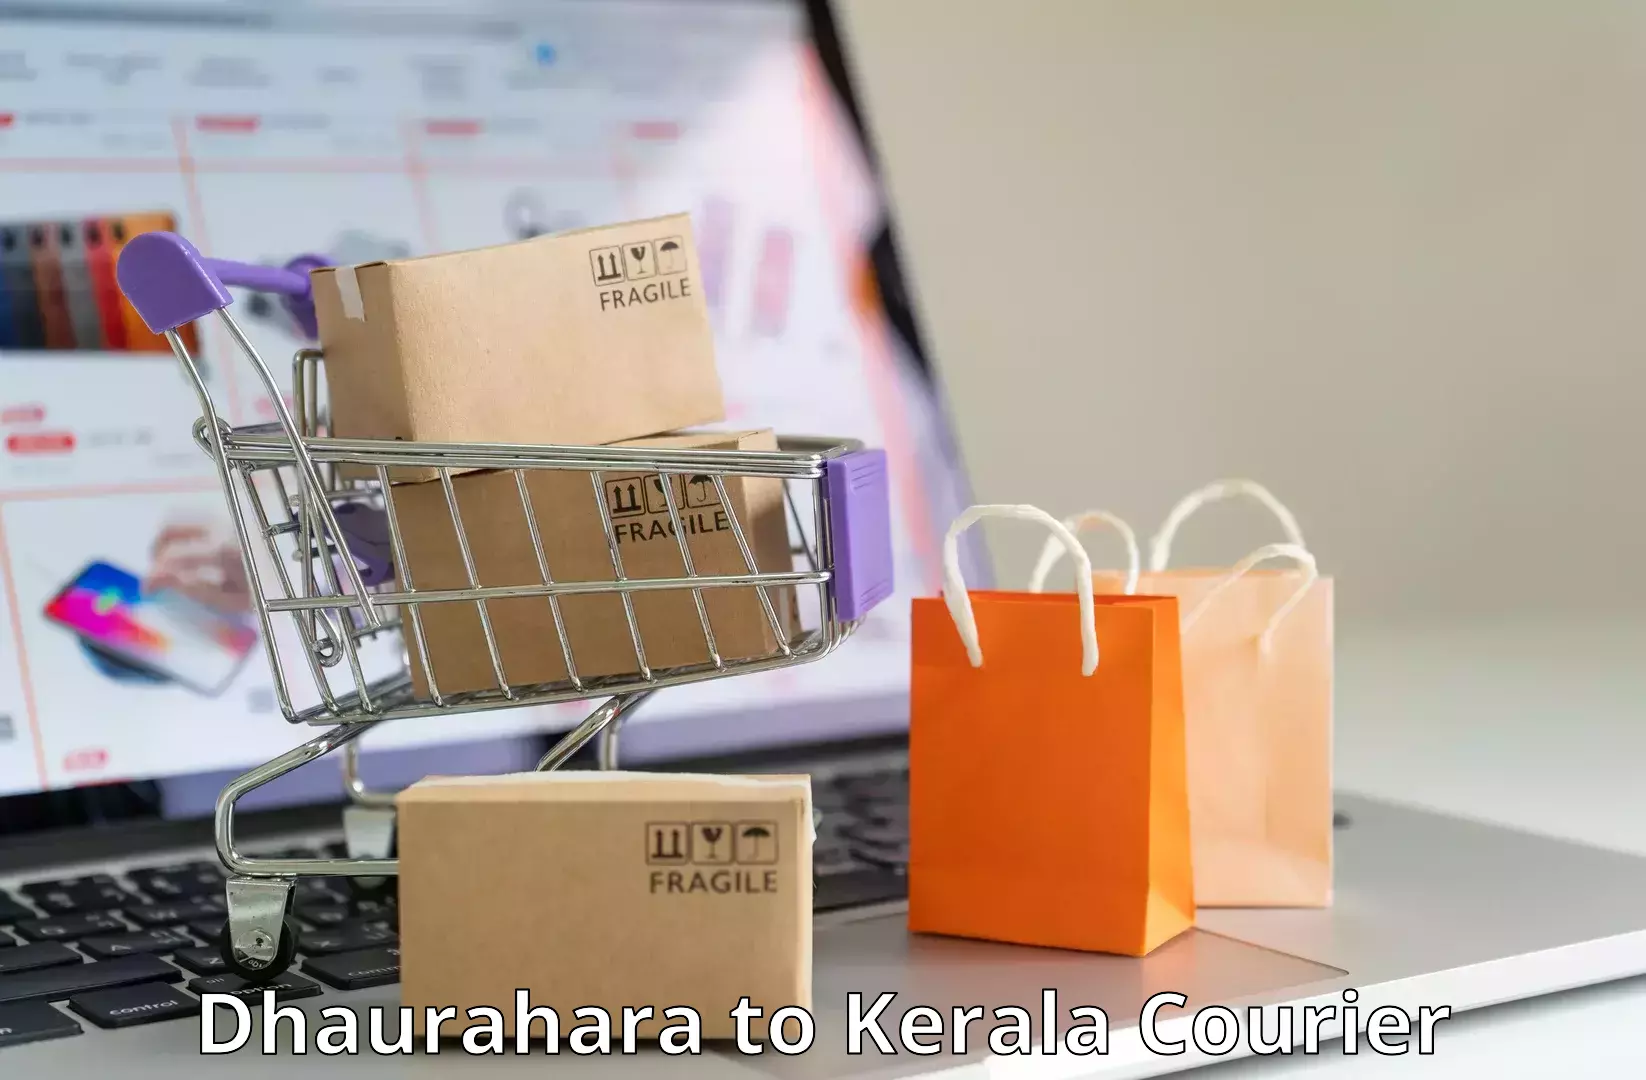 Expedited shipping methods Dhaurahara to Valanchery